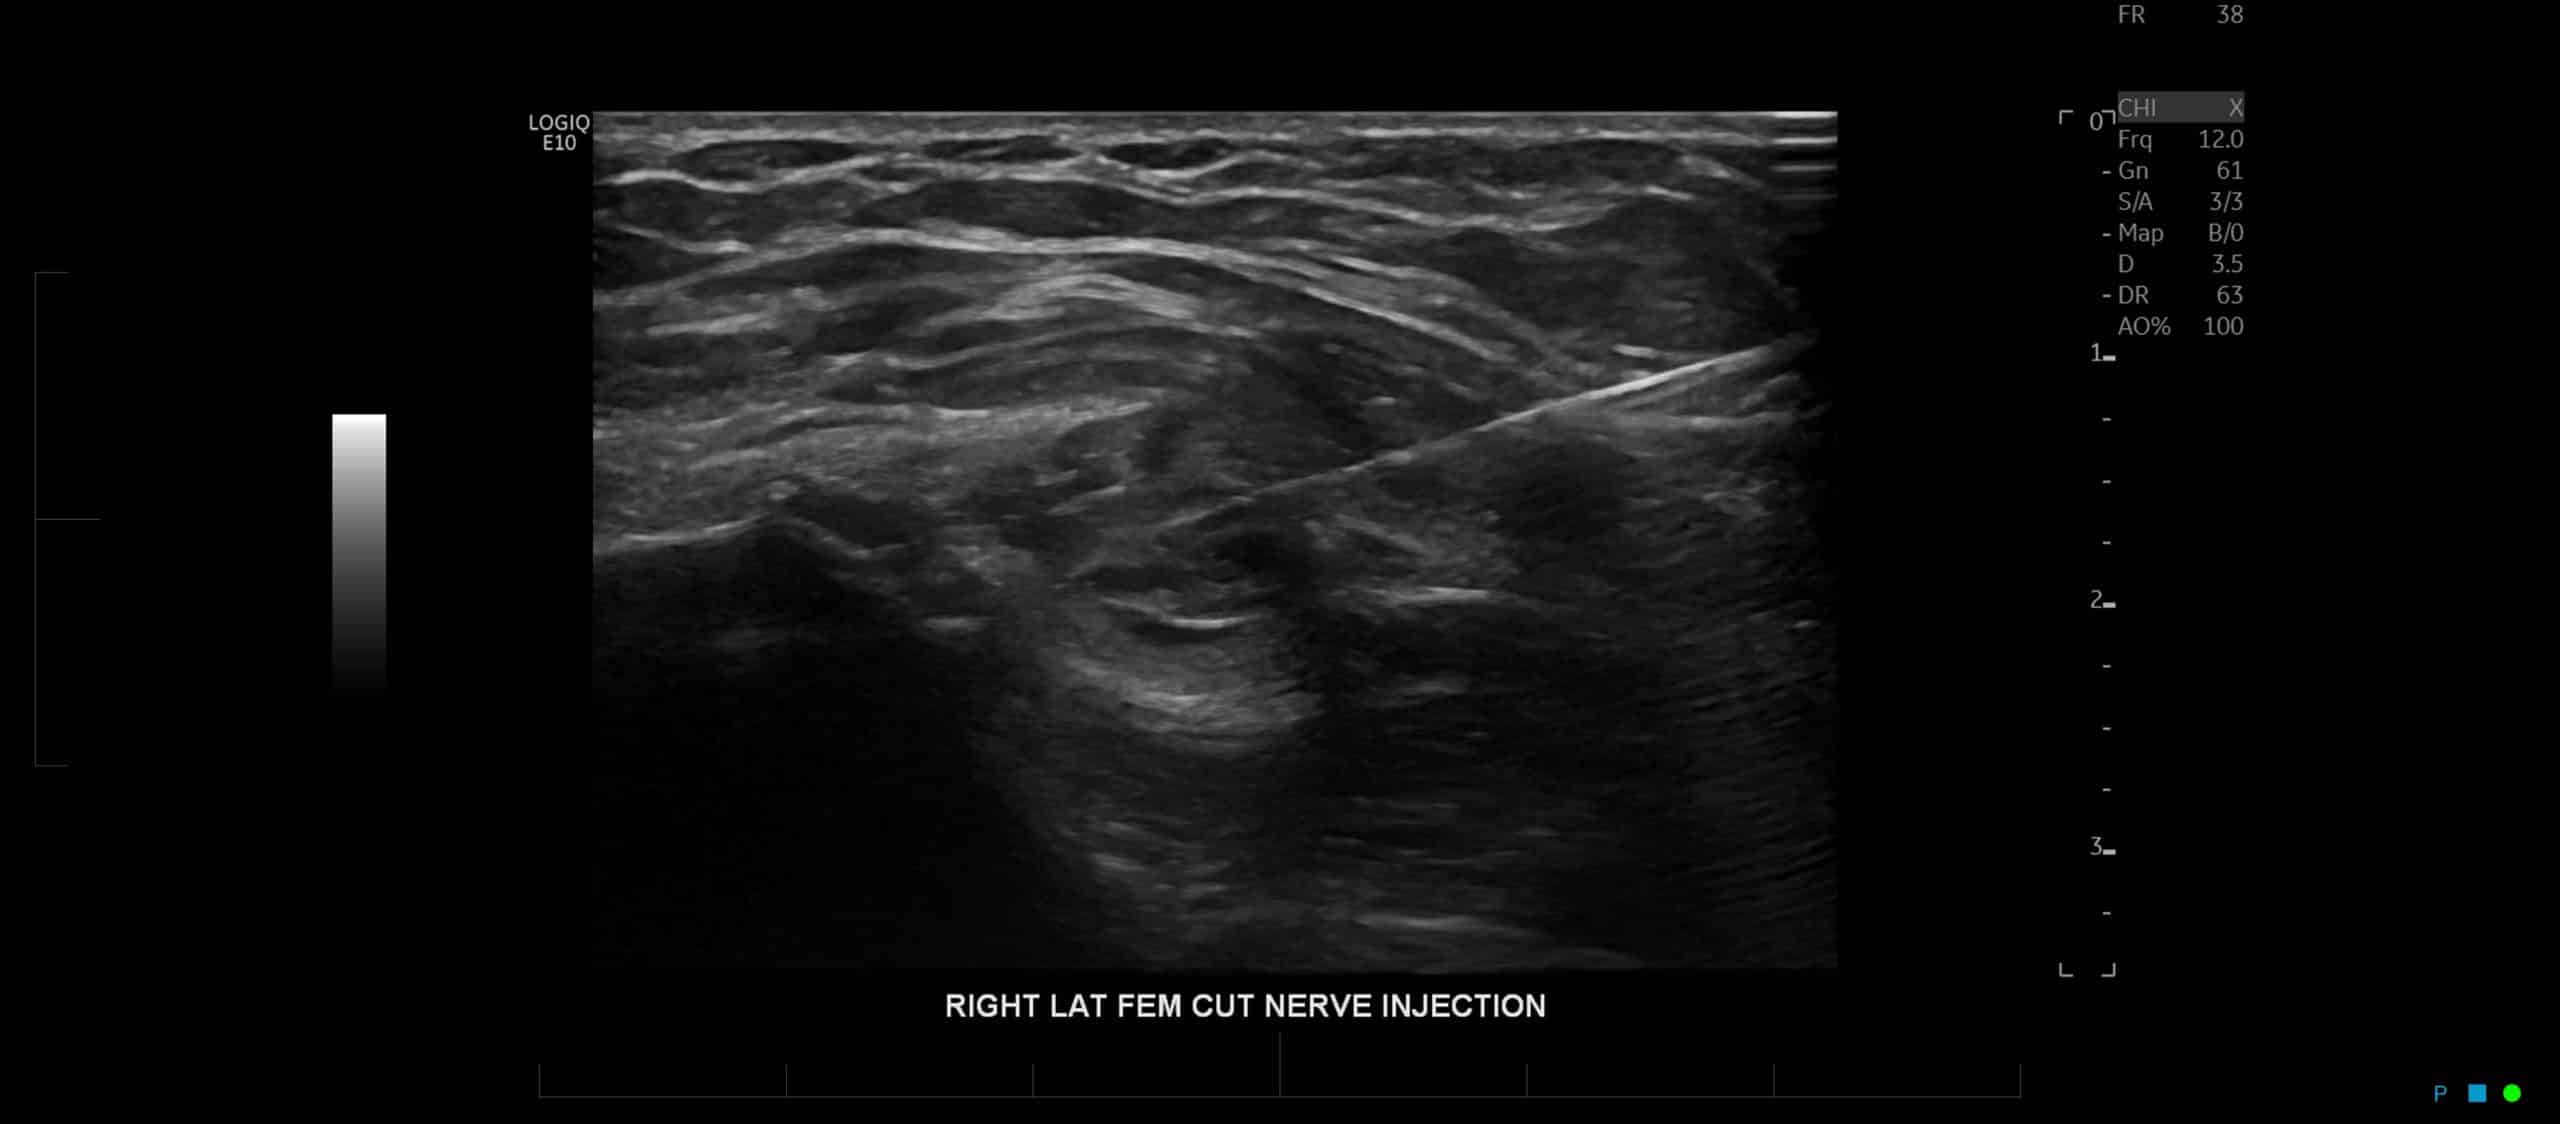 an ultrasound image of right lat fem cut nerve injection